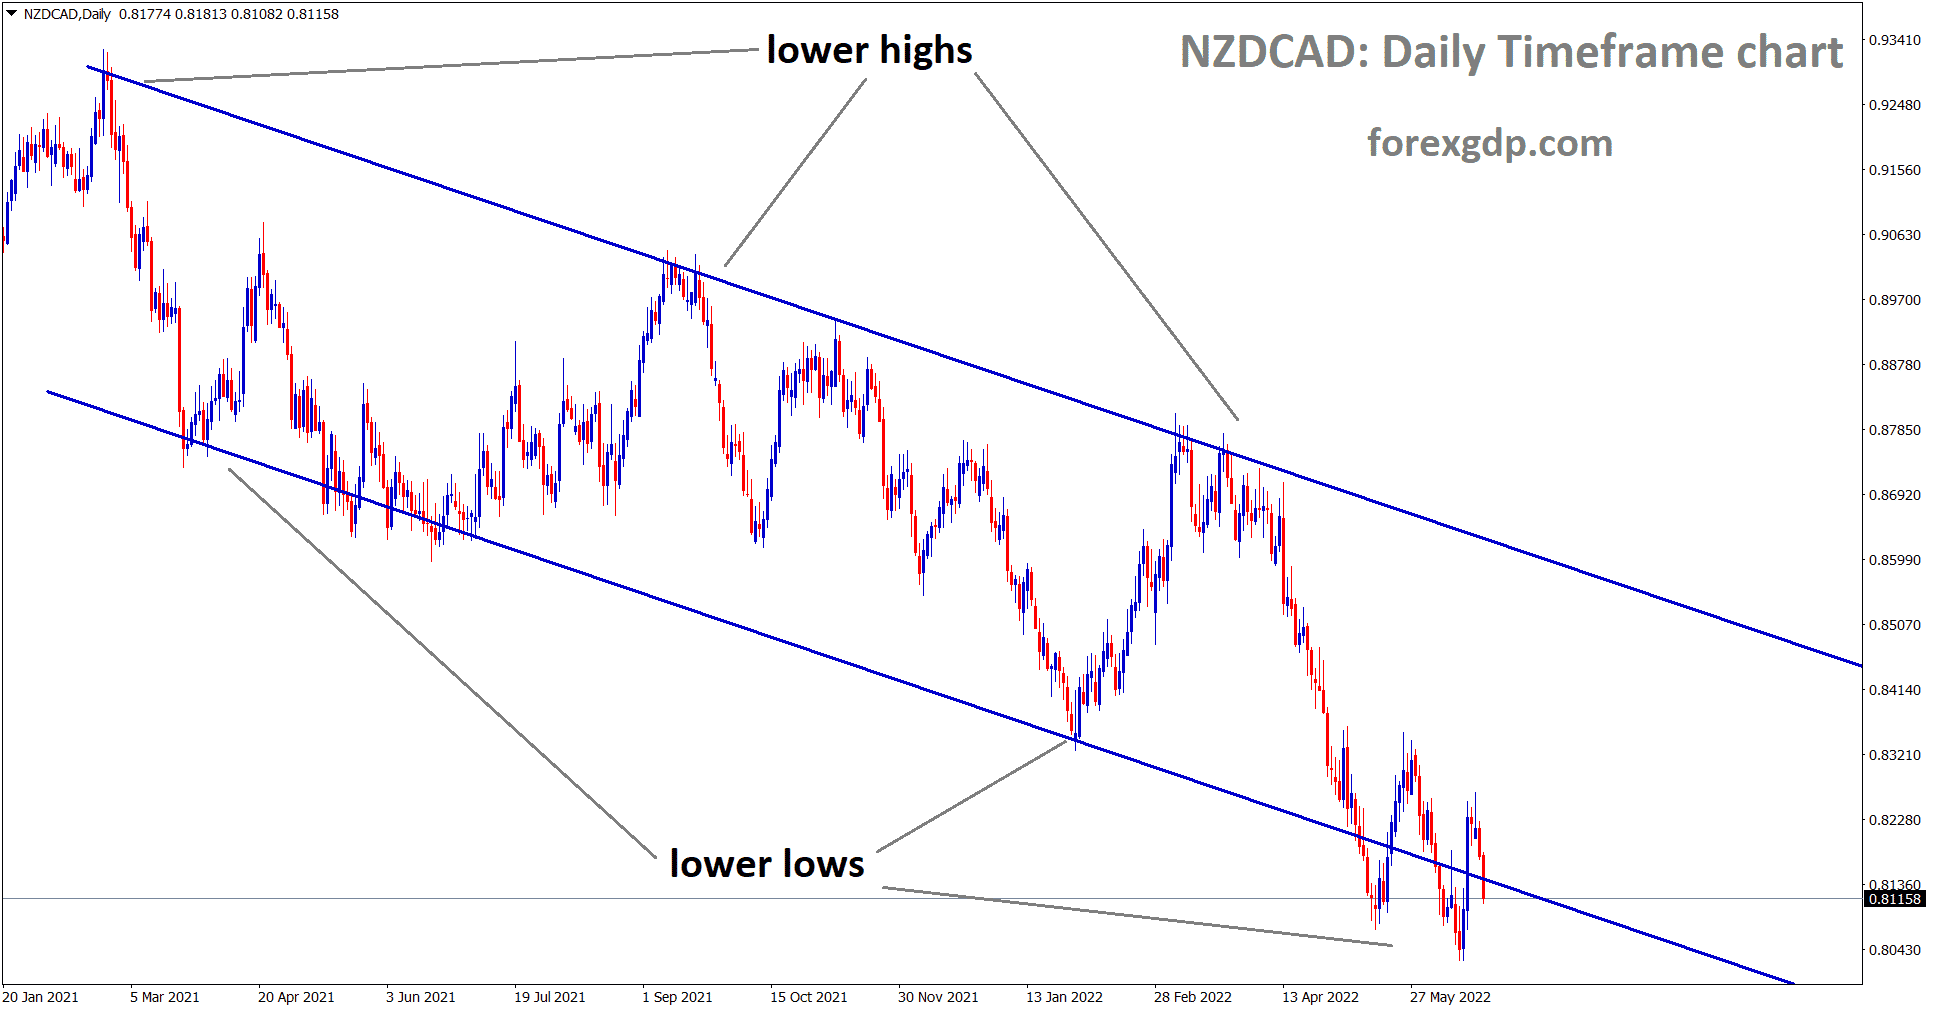 NZDCAD is moving in descending channel and the market has reached the lower low area of the channel.